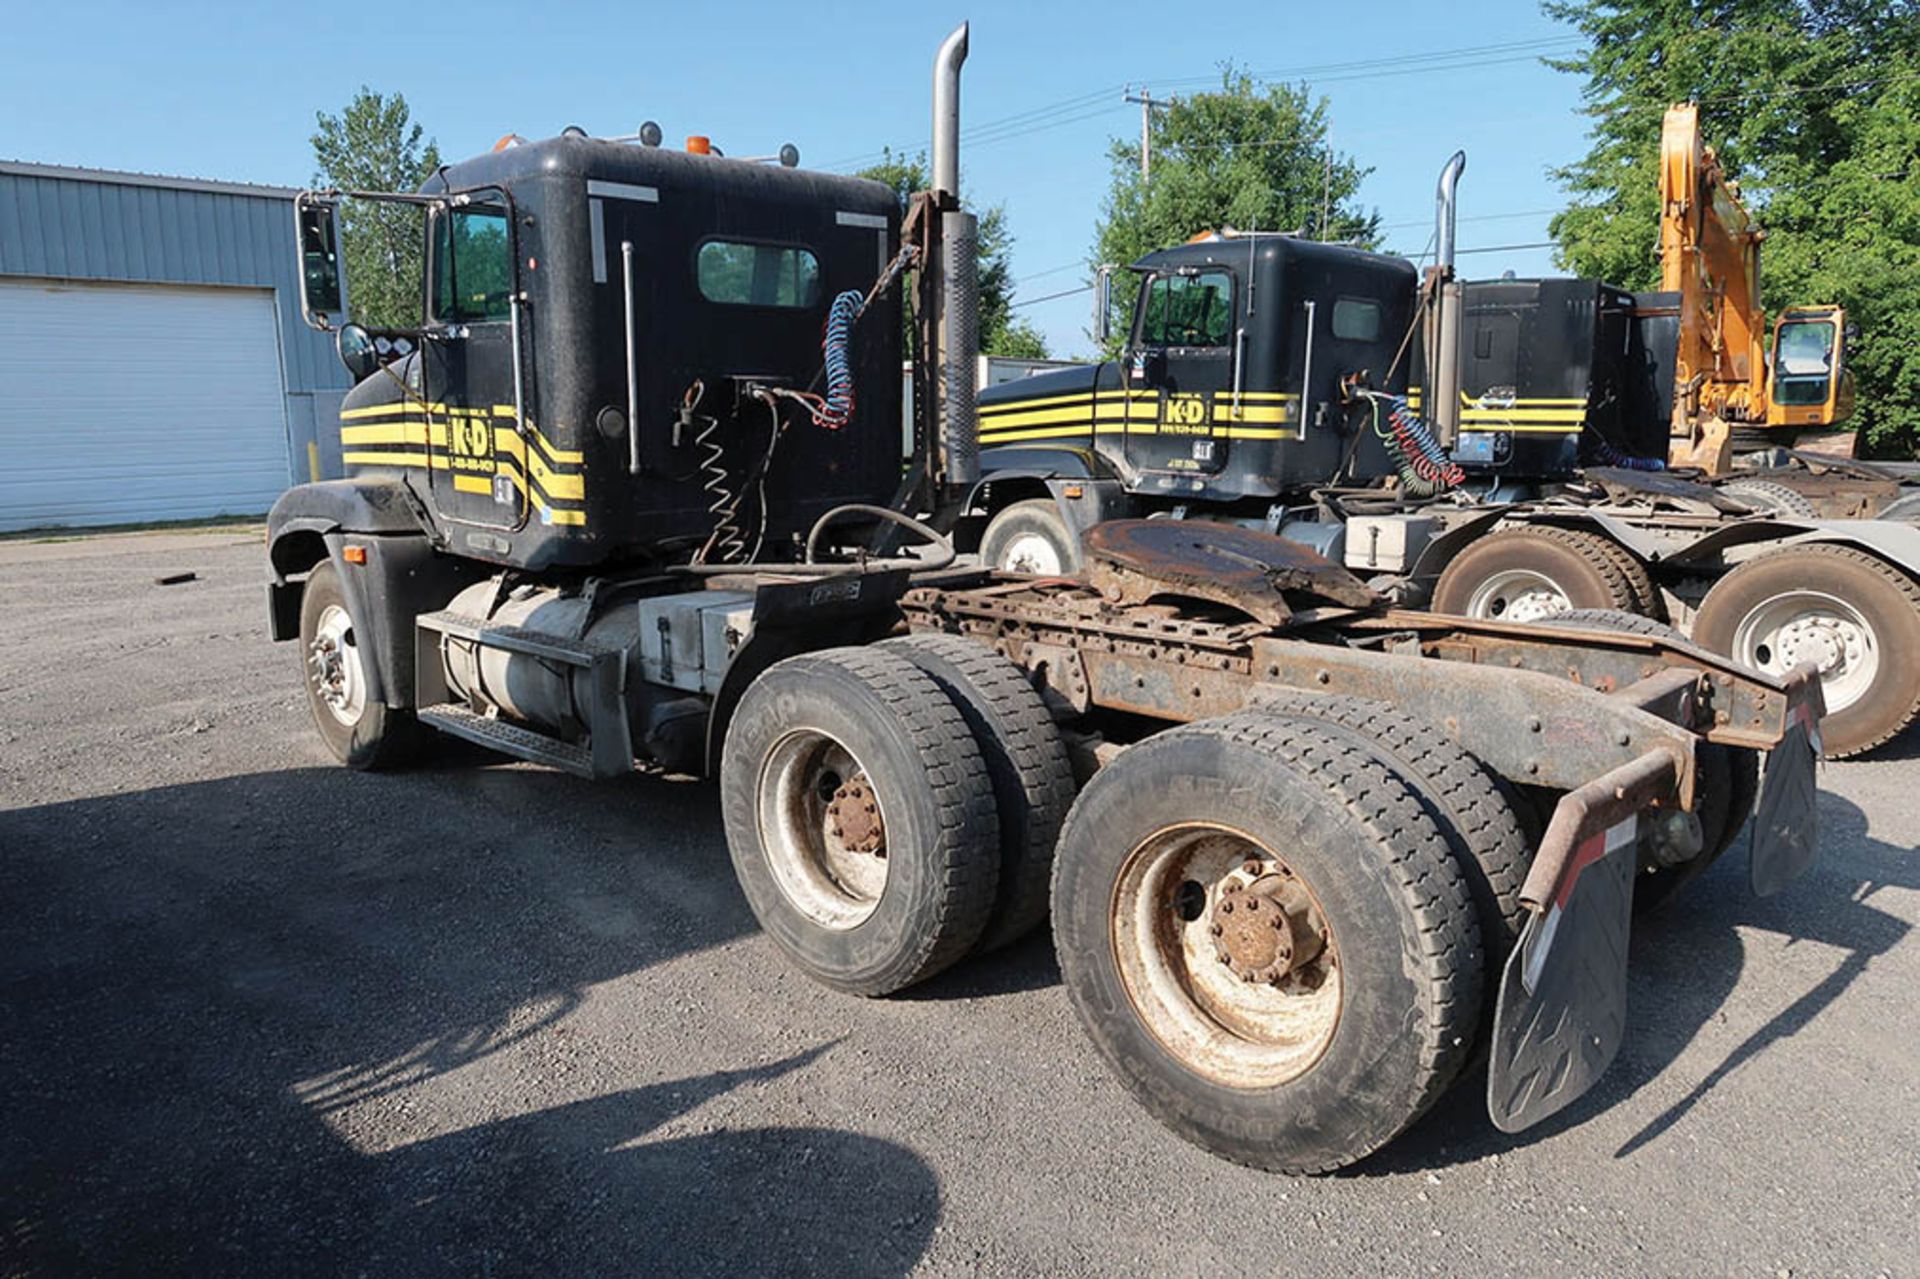 1996 FREIGHTLINER TANDEM AXLE TWIN SCREW SEMI-TRUCK; VIN #1FUYDKYBXTH742569, 61,4000 LB. GVWR, WET - Image 5 of 7